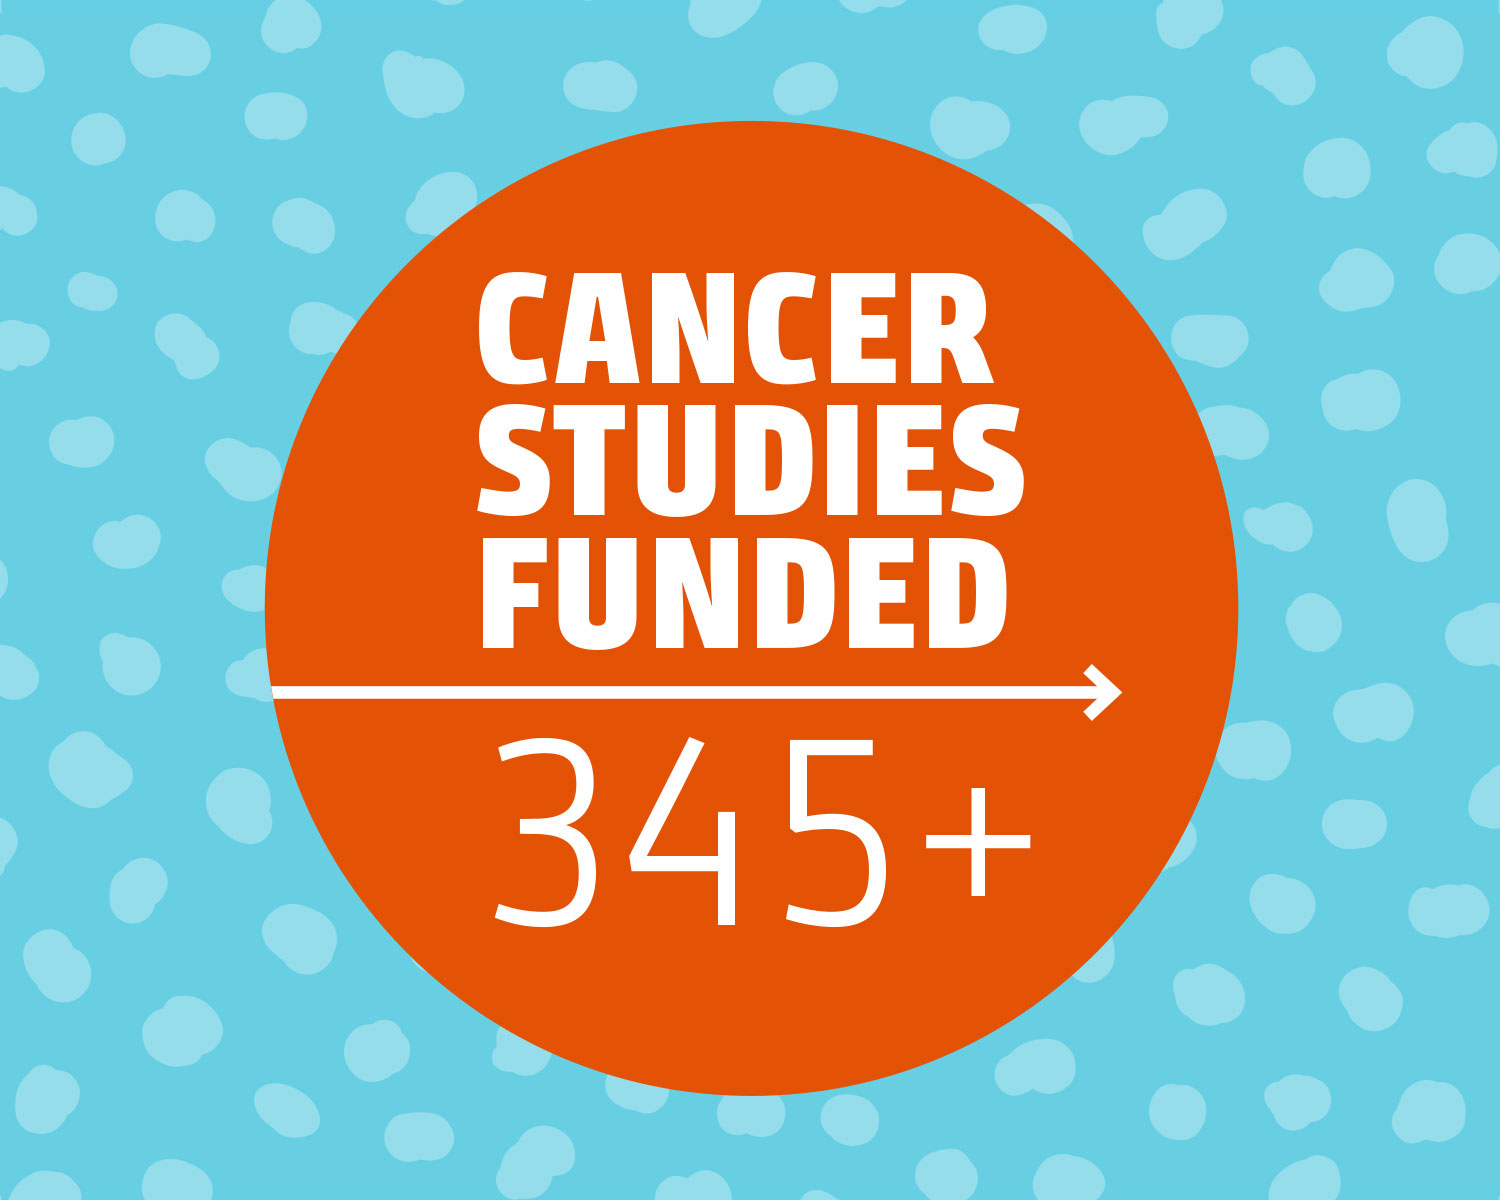 Support the Best Animal Resarch Around the World. We have funded over 345+ cancer studies, but there's still more to do. With your help, we can Stop Cancer Furever!